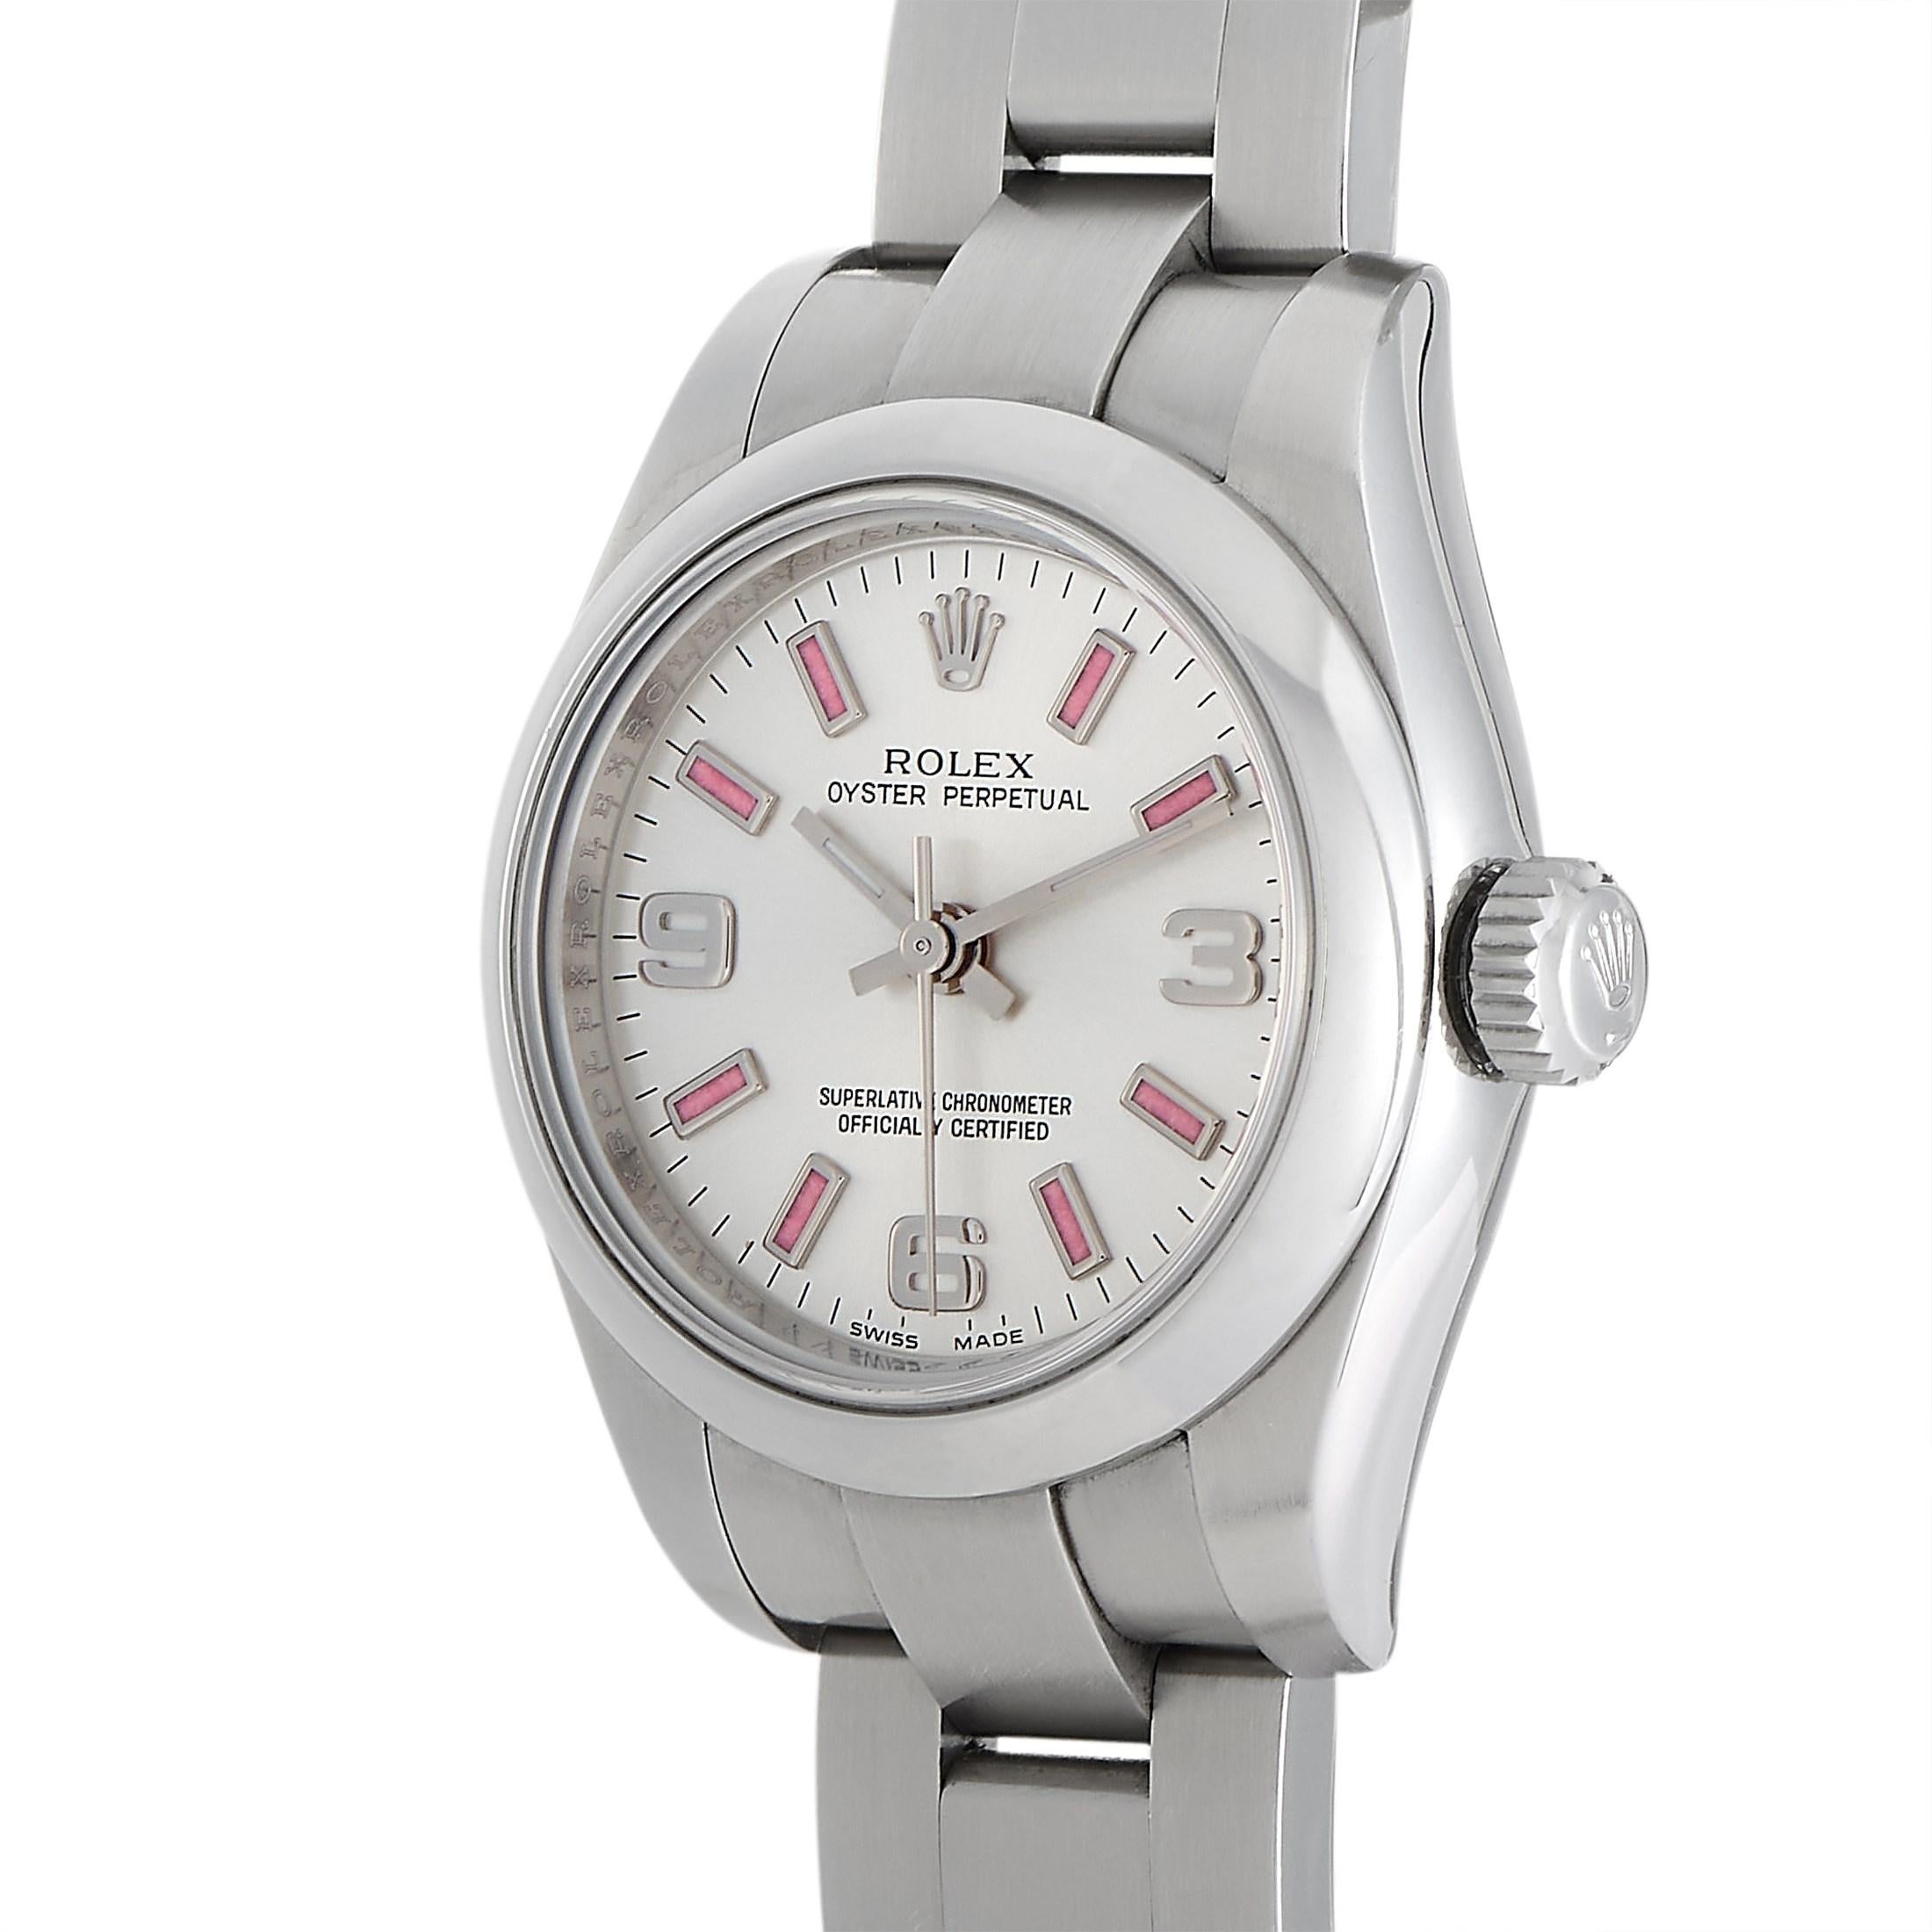 This Rolex Ladies Oyster Perpetual 26 mm Watch, reference number 176200, features a stainless case measuring 26 mm in diameter. It is presented on a matching white oystersteel bracelet and secured with a folding clasp. The silver dial displays